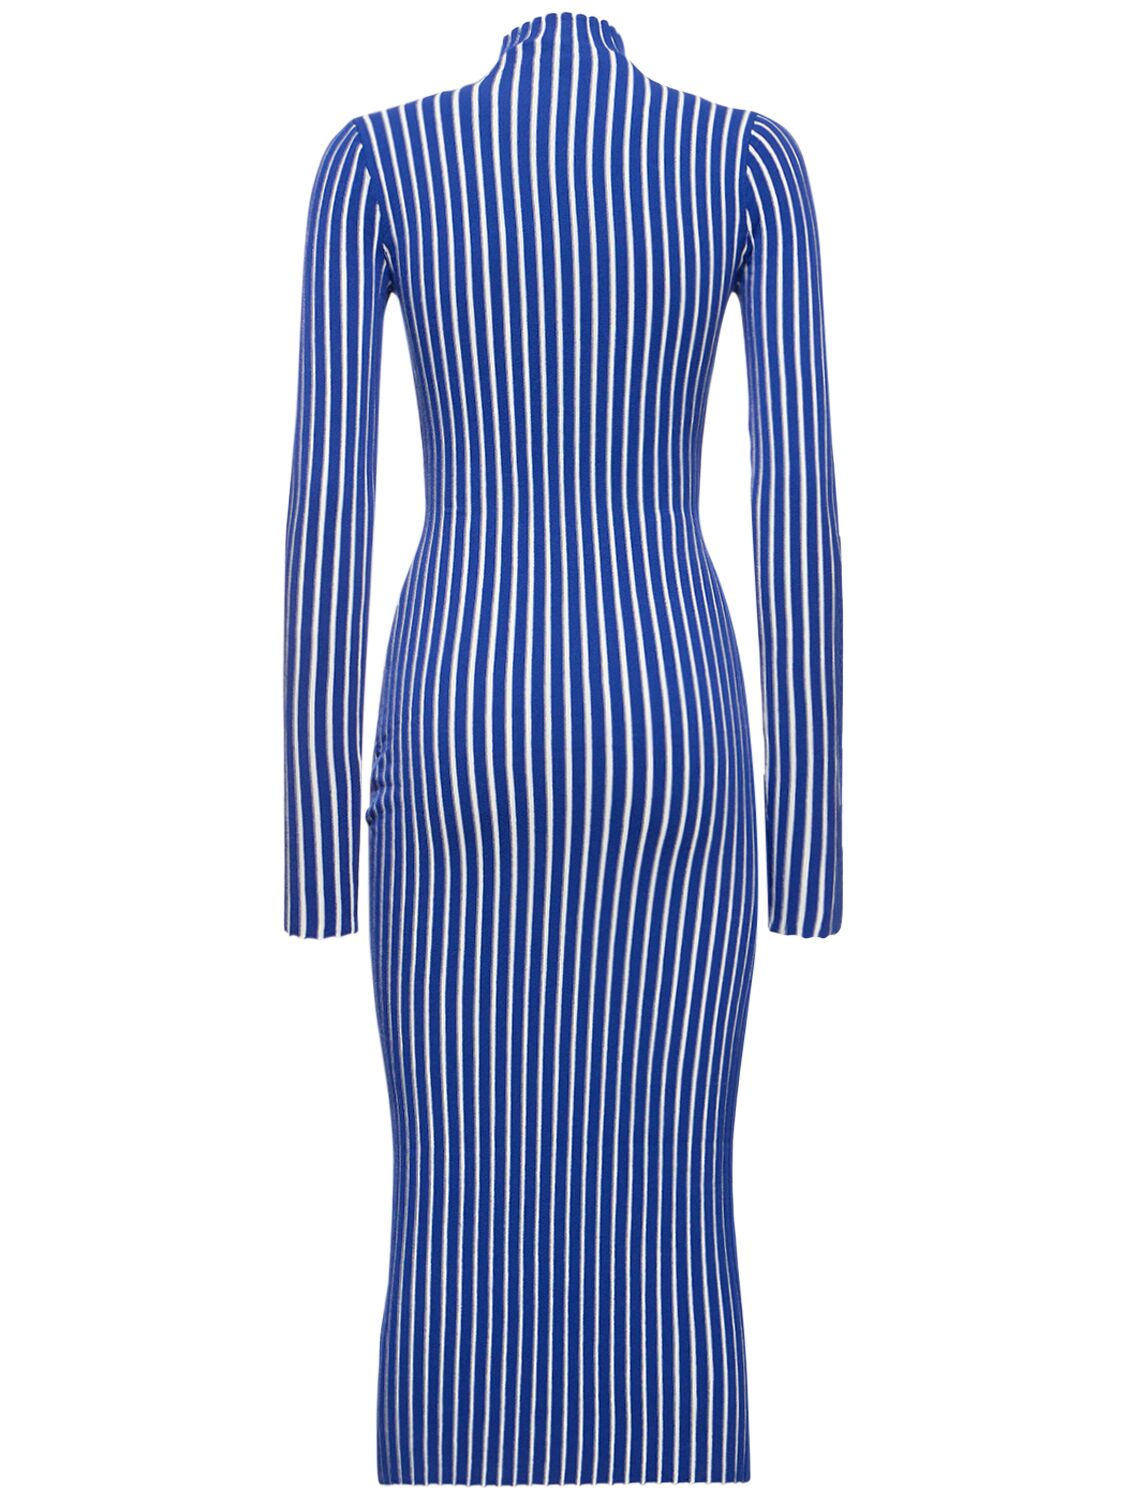 Image of The Ridley Cotton Blend Knit Midi Dress